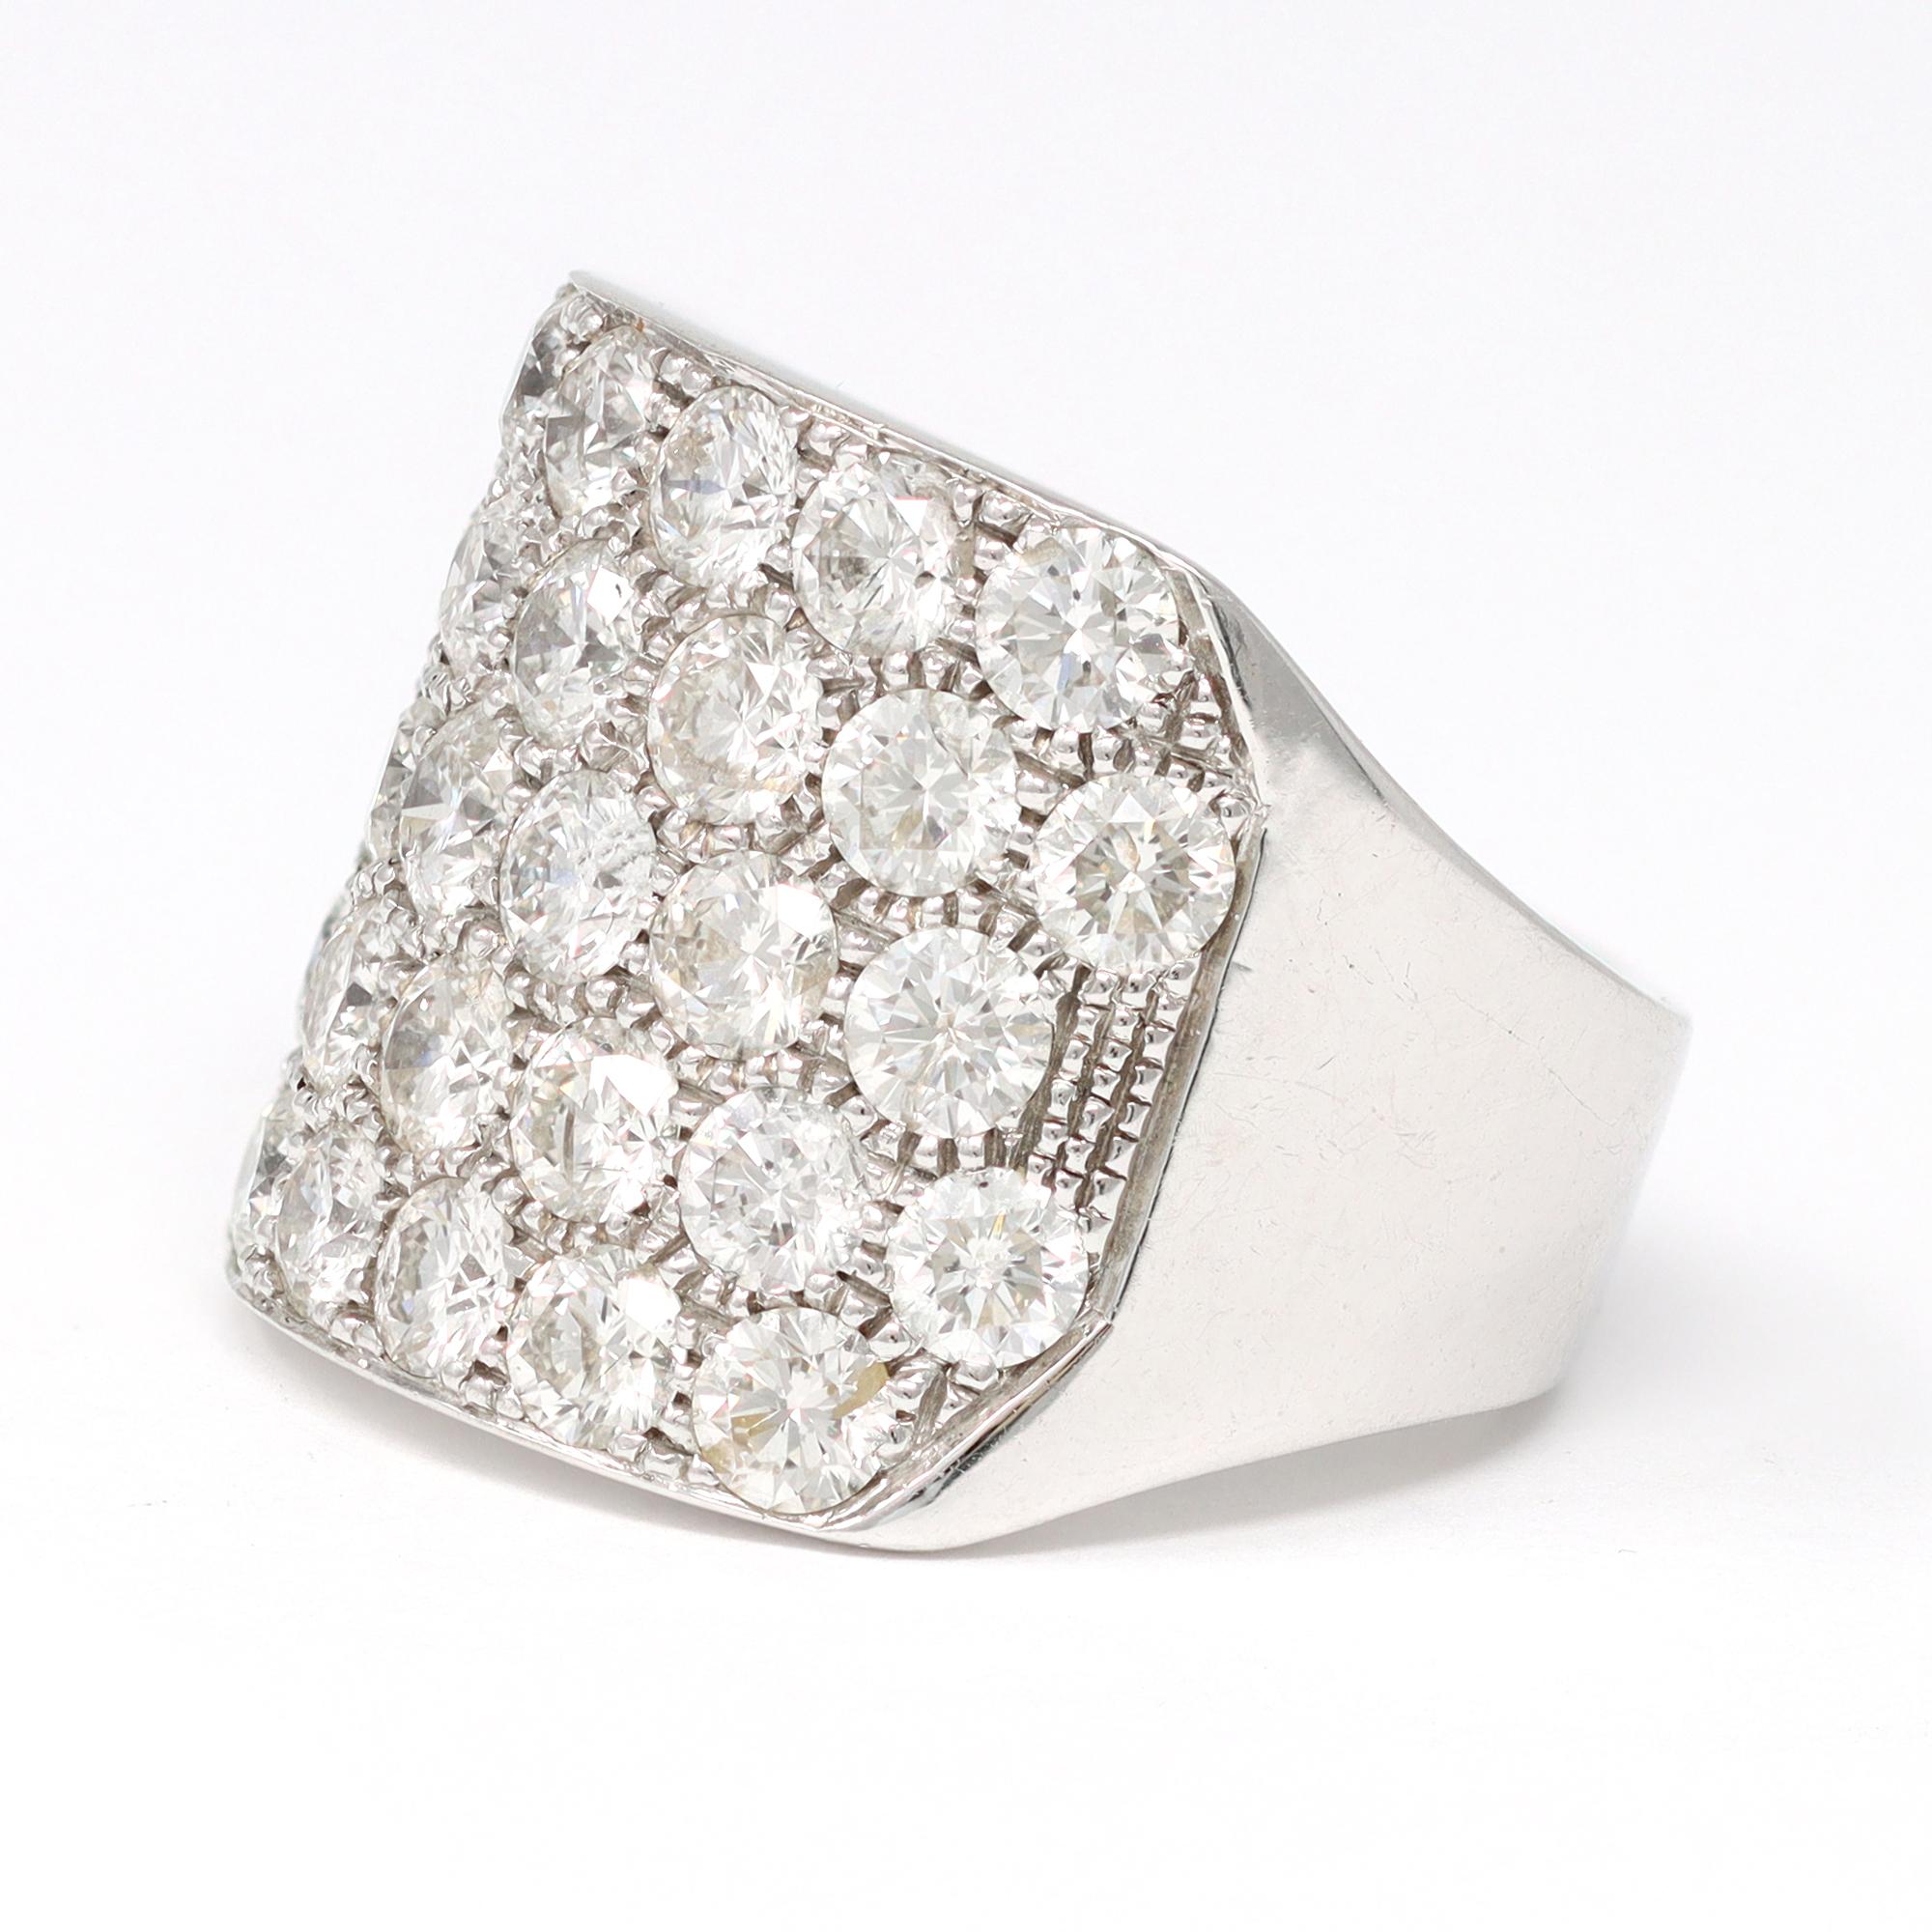 A modern cocktail ring originated in Italy featuring 32 round diamonds of about 30 points each, in pavé setting. The large band ring is set in 14 karat white gold and sits comfortably on the finger. The estimated weight of the diamonds is 8.70